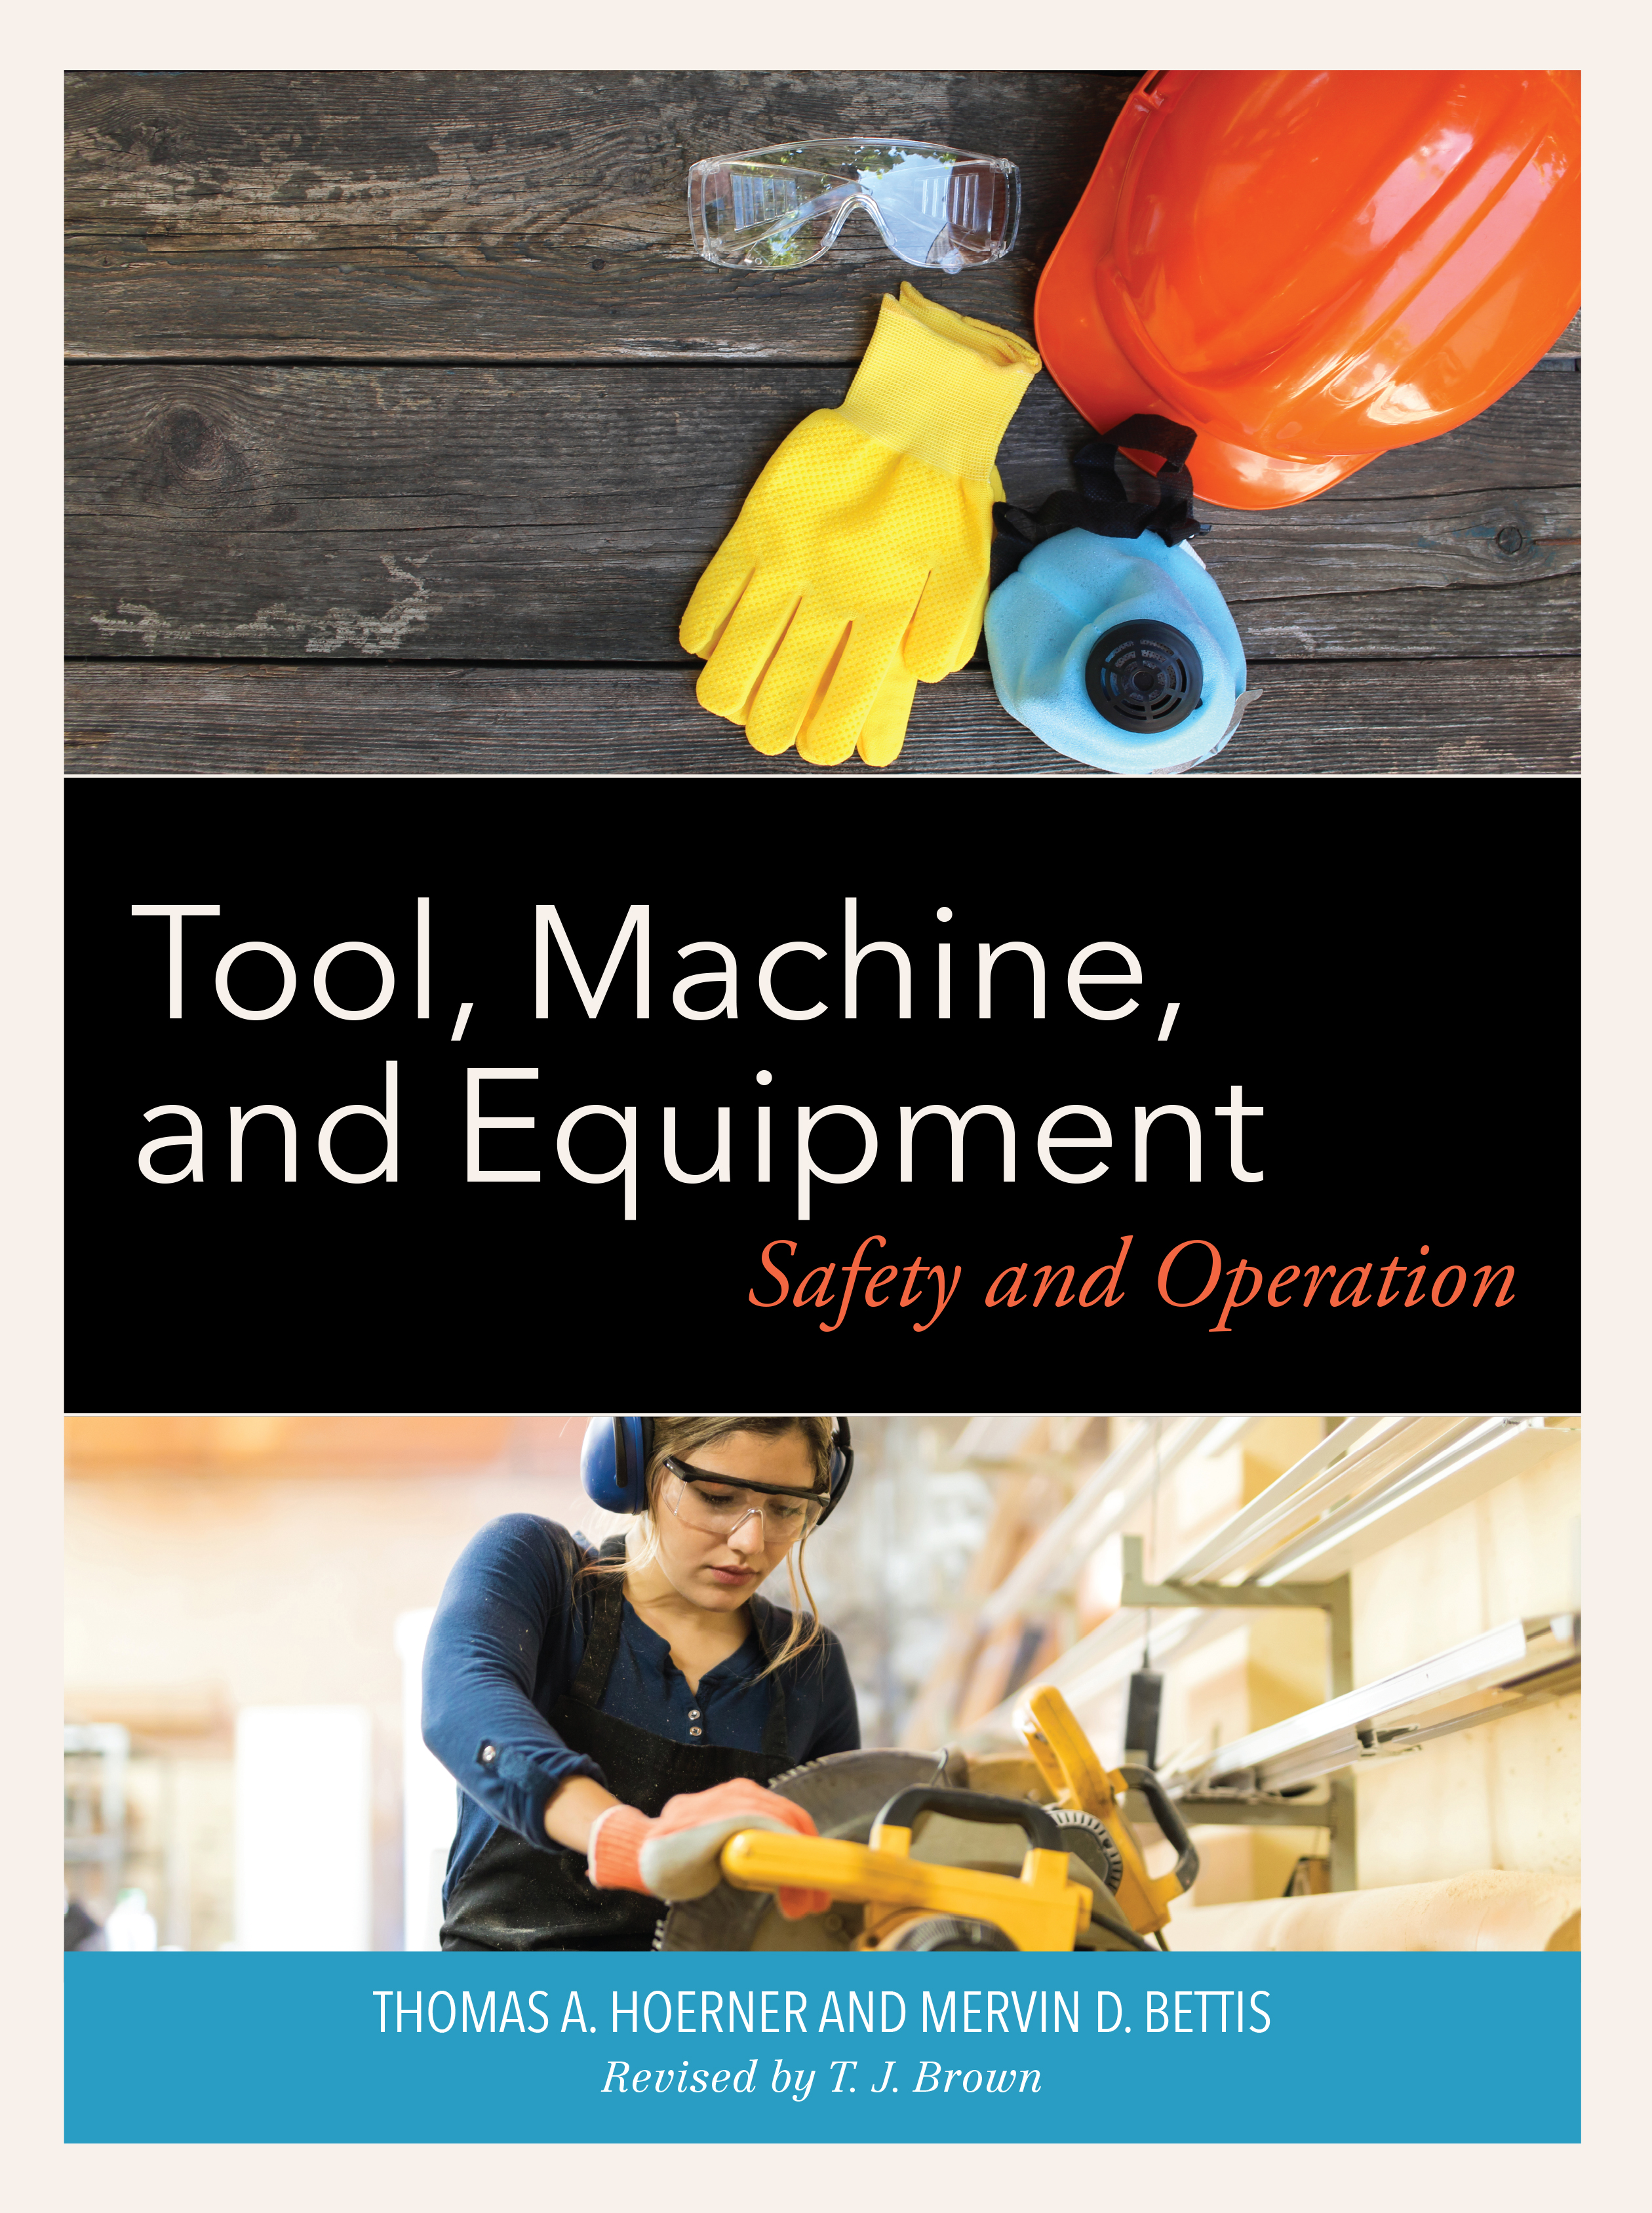 Tool, Machine, and Equipment: Safety and Operation